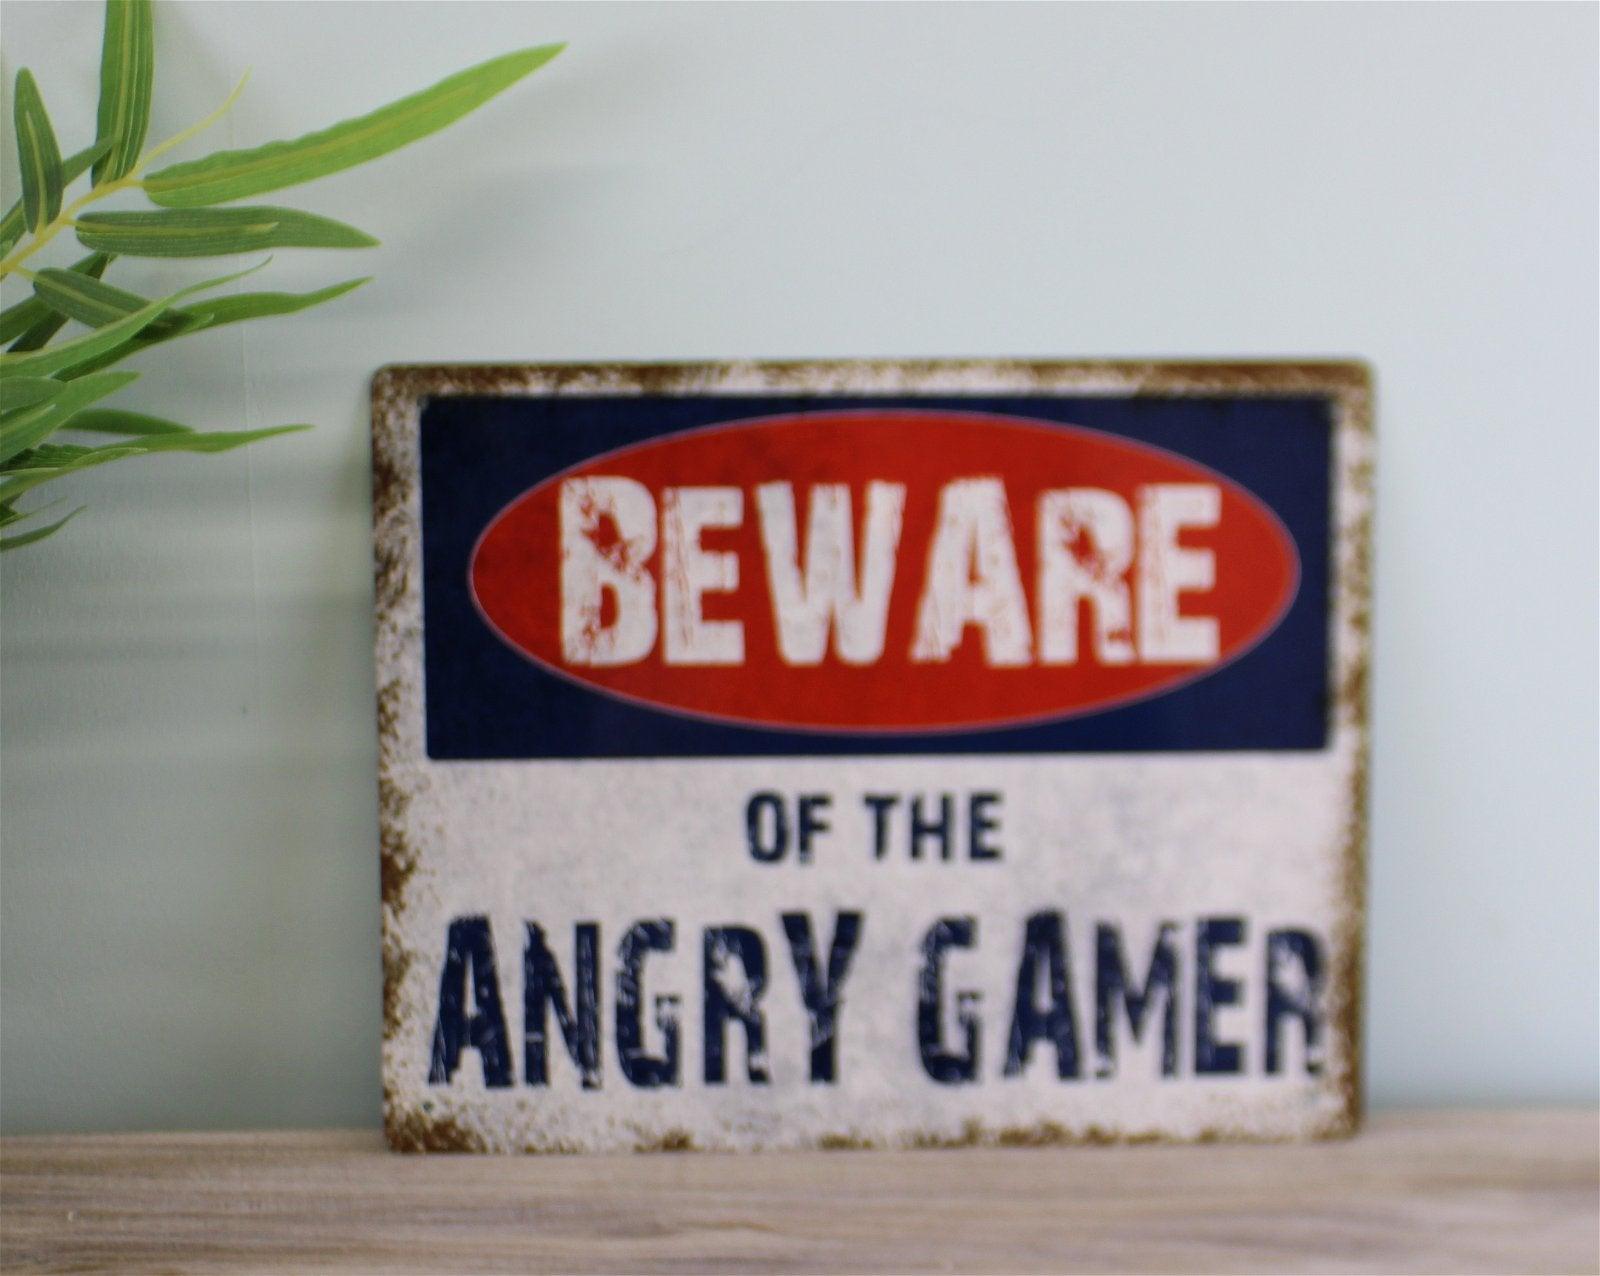 Vintage Metal Sign - Beware Of The Angry Gamer - £18.99 - Signs & Rules 